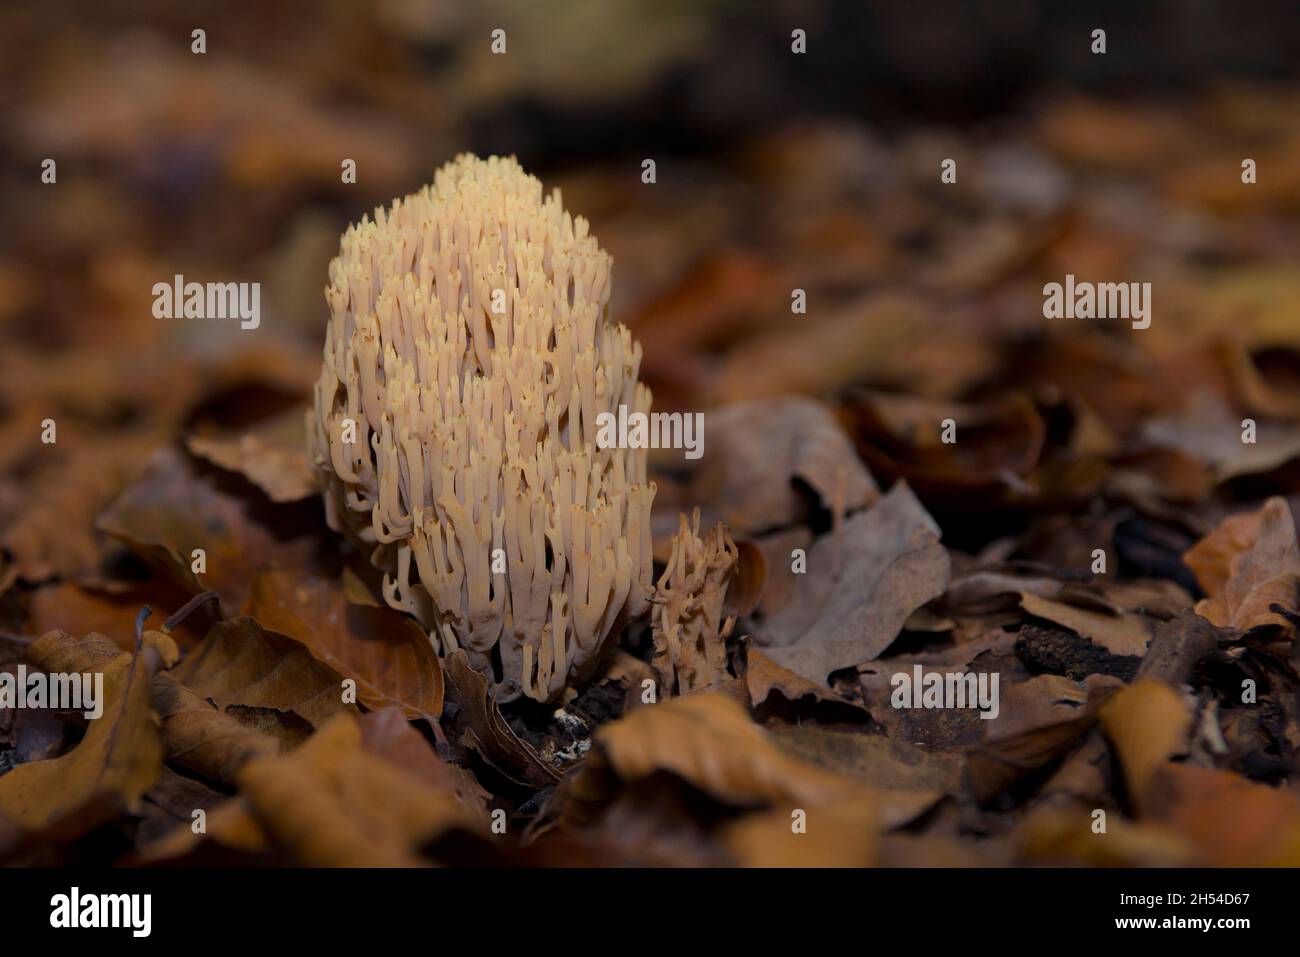 Upright Coral (Ramaria stricta) fungus amidst fallen leaves on the forest floor Stock Photo